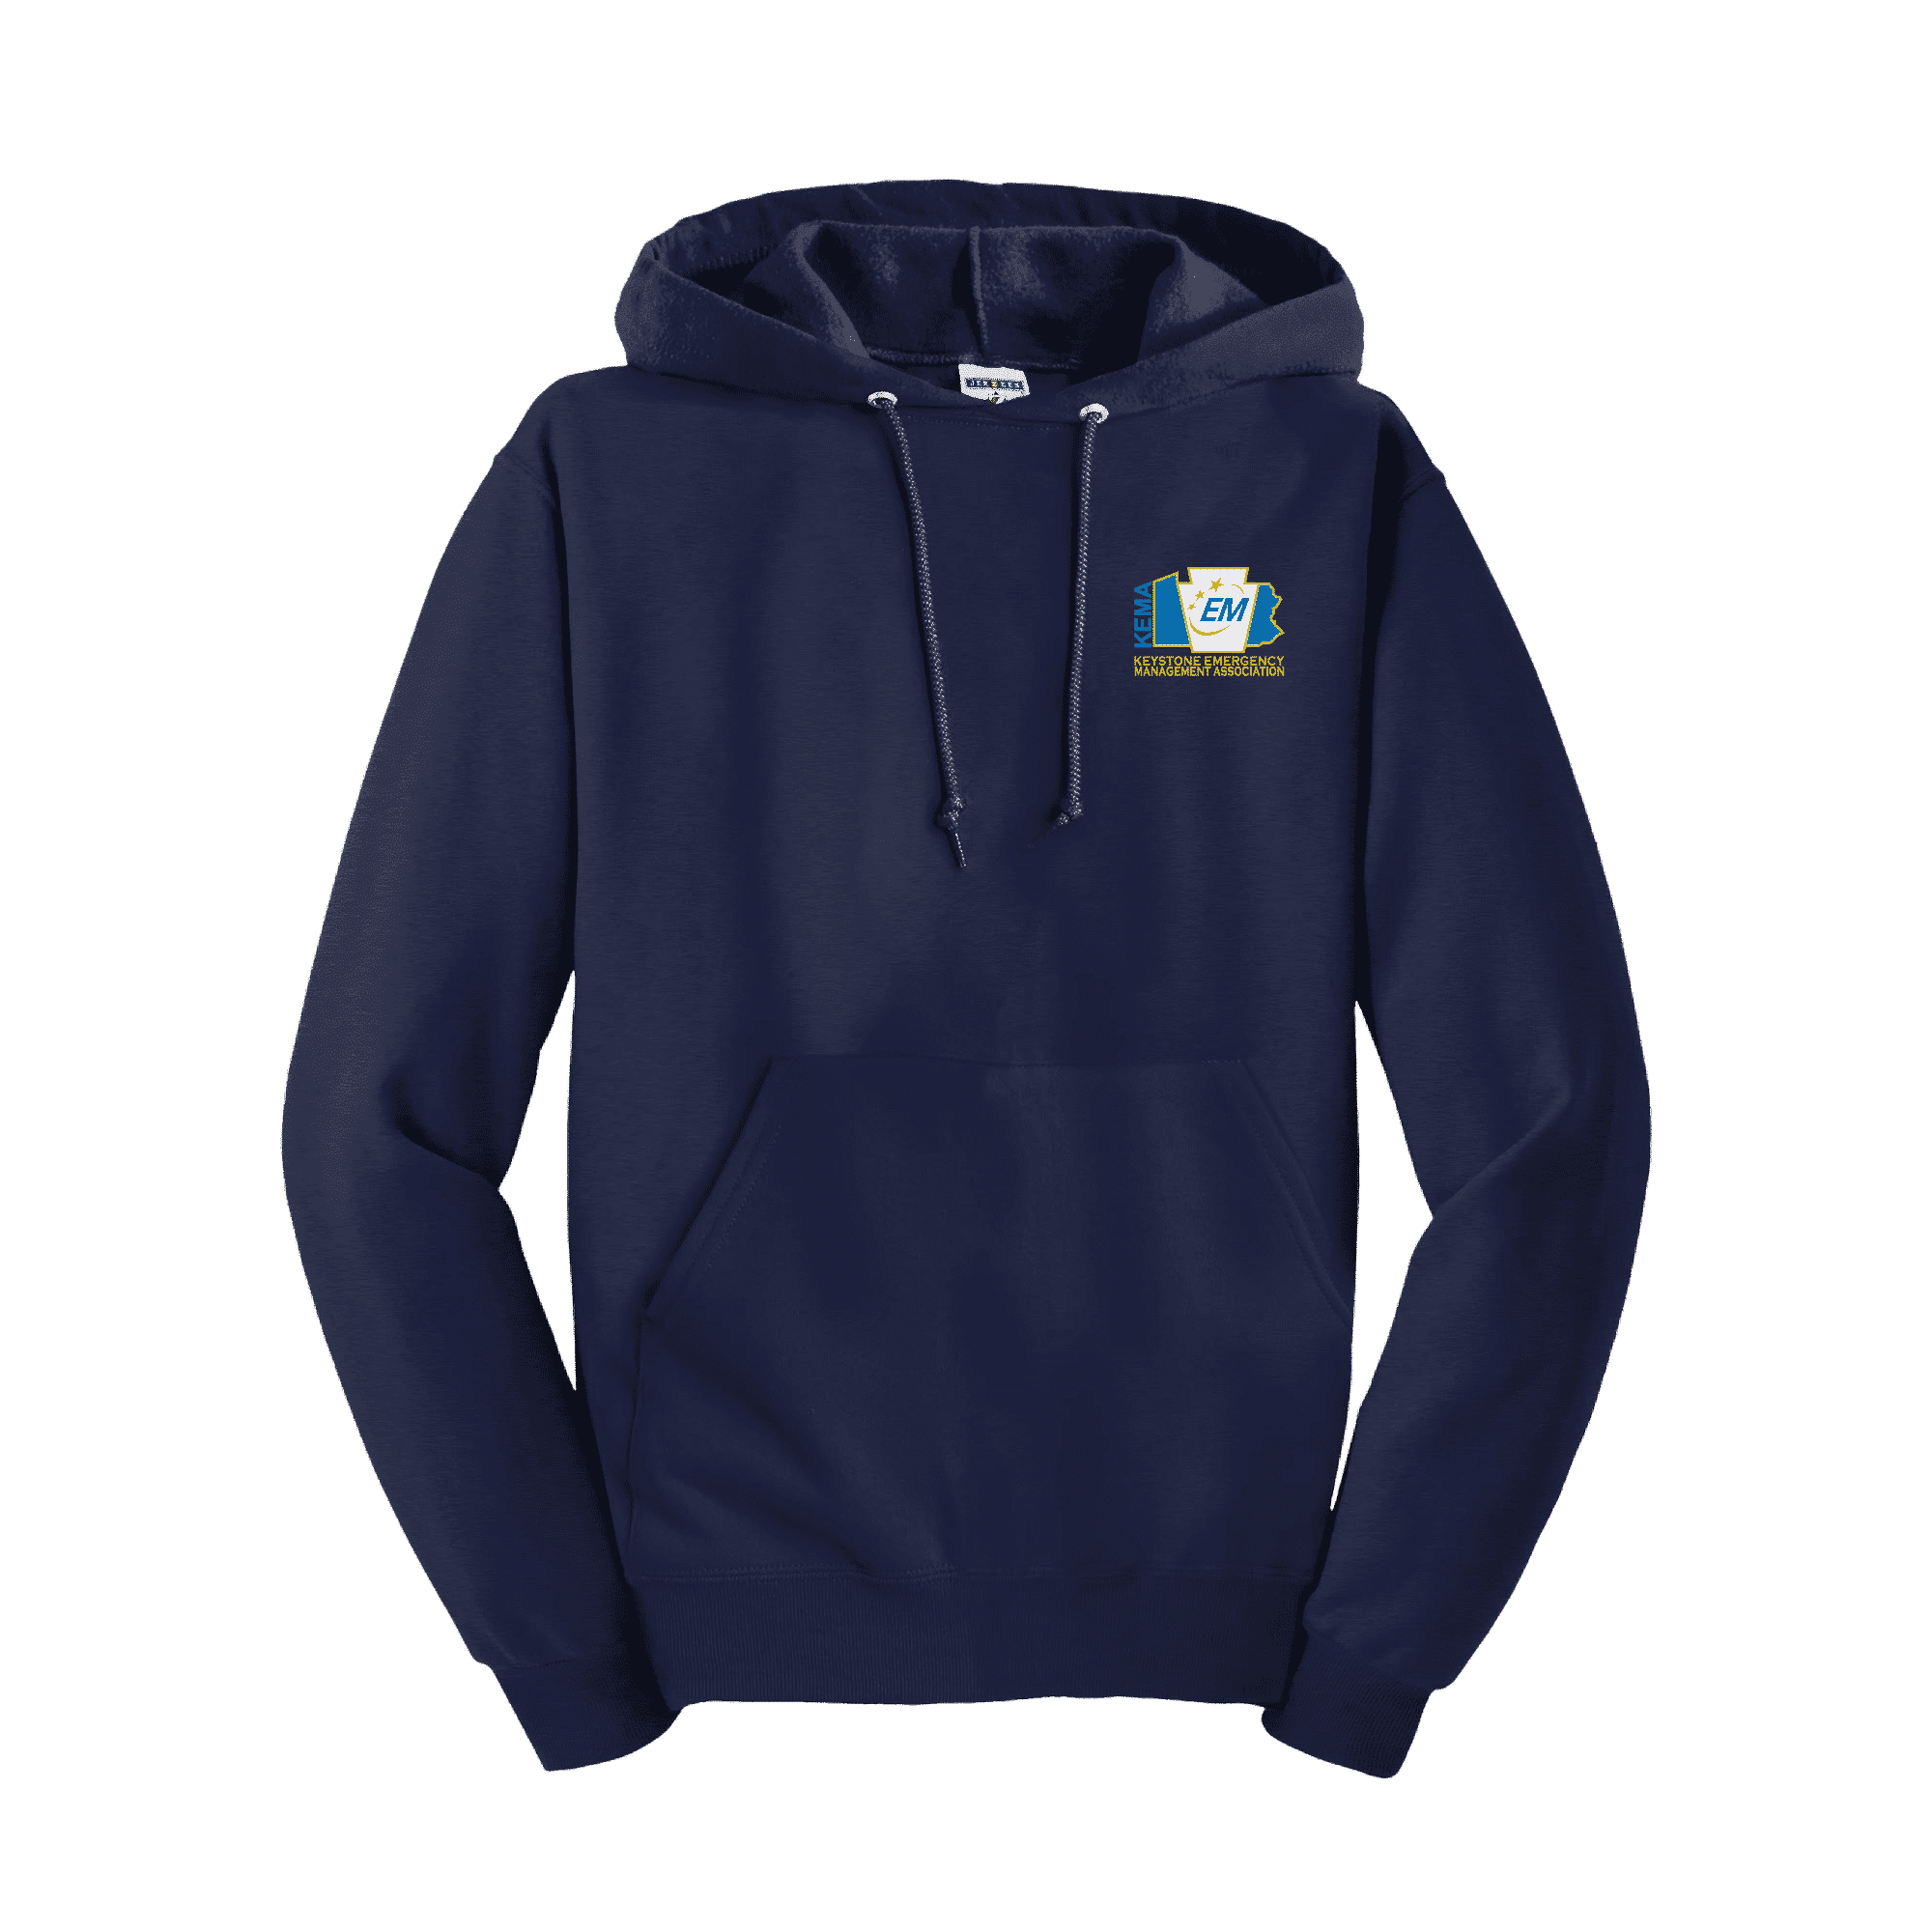 KEMA - 996M JERZEES Pullover Hoodie - Left Chest Embroidered Design